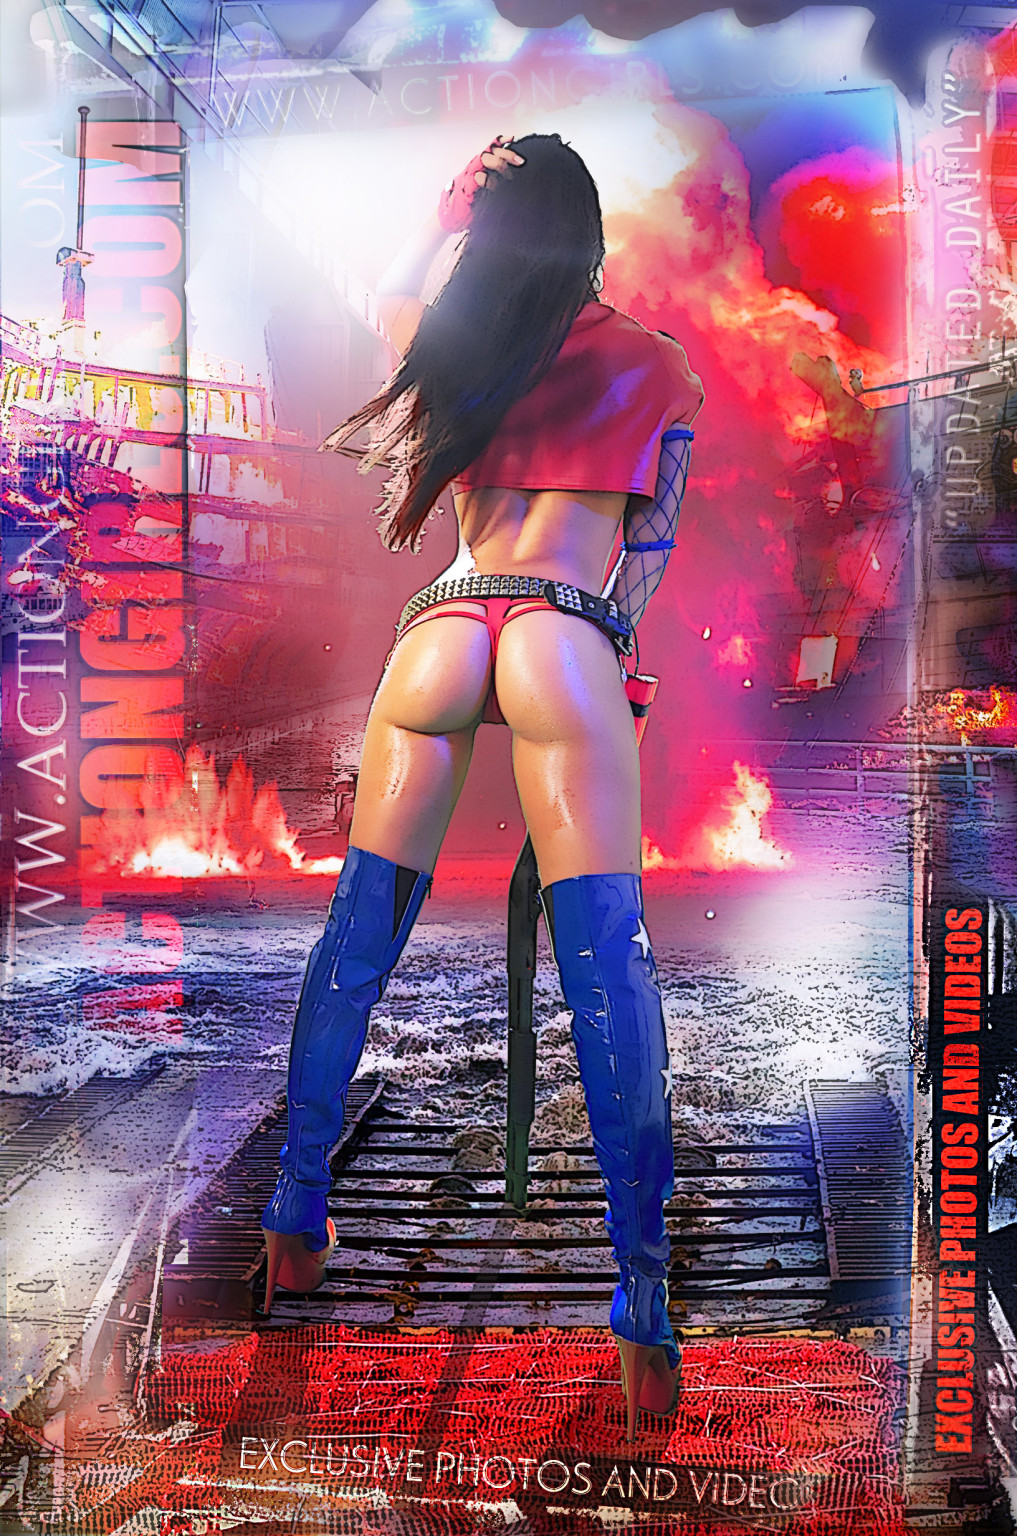 Exclusif actiongirls web posters deluxe photos actiongirls
 #70898367